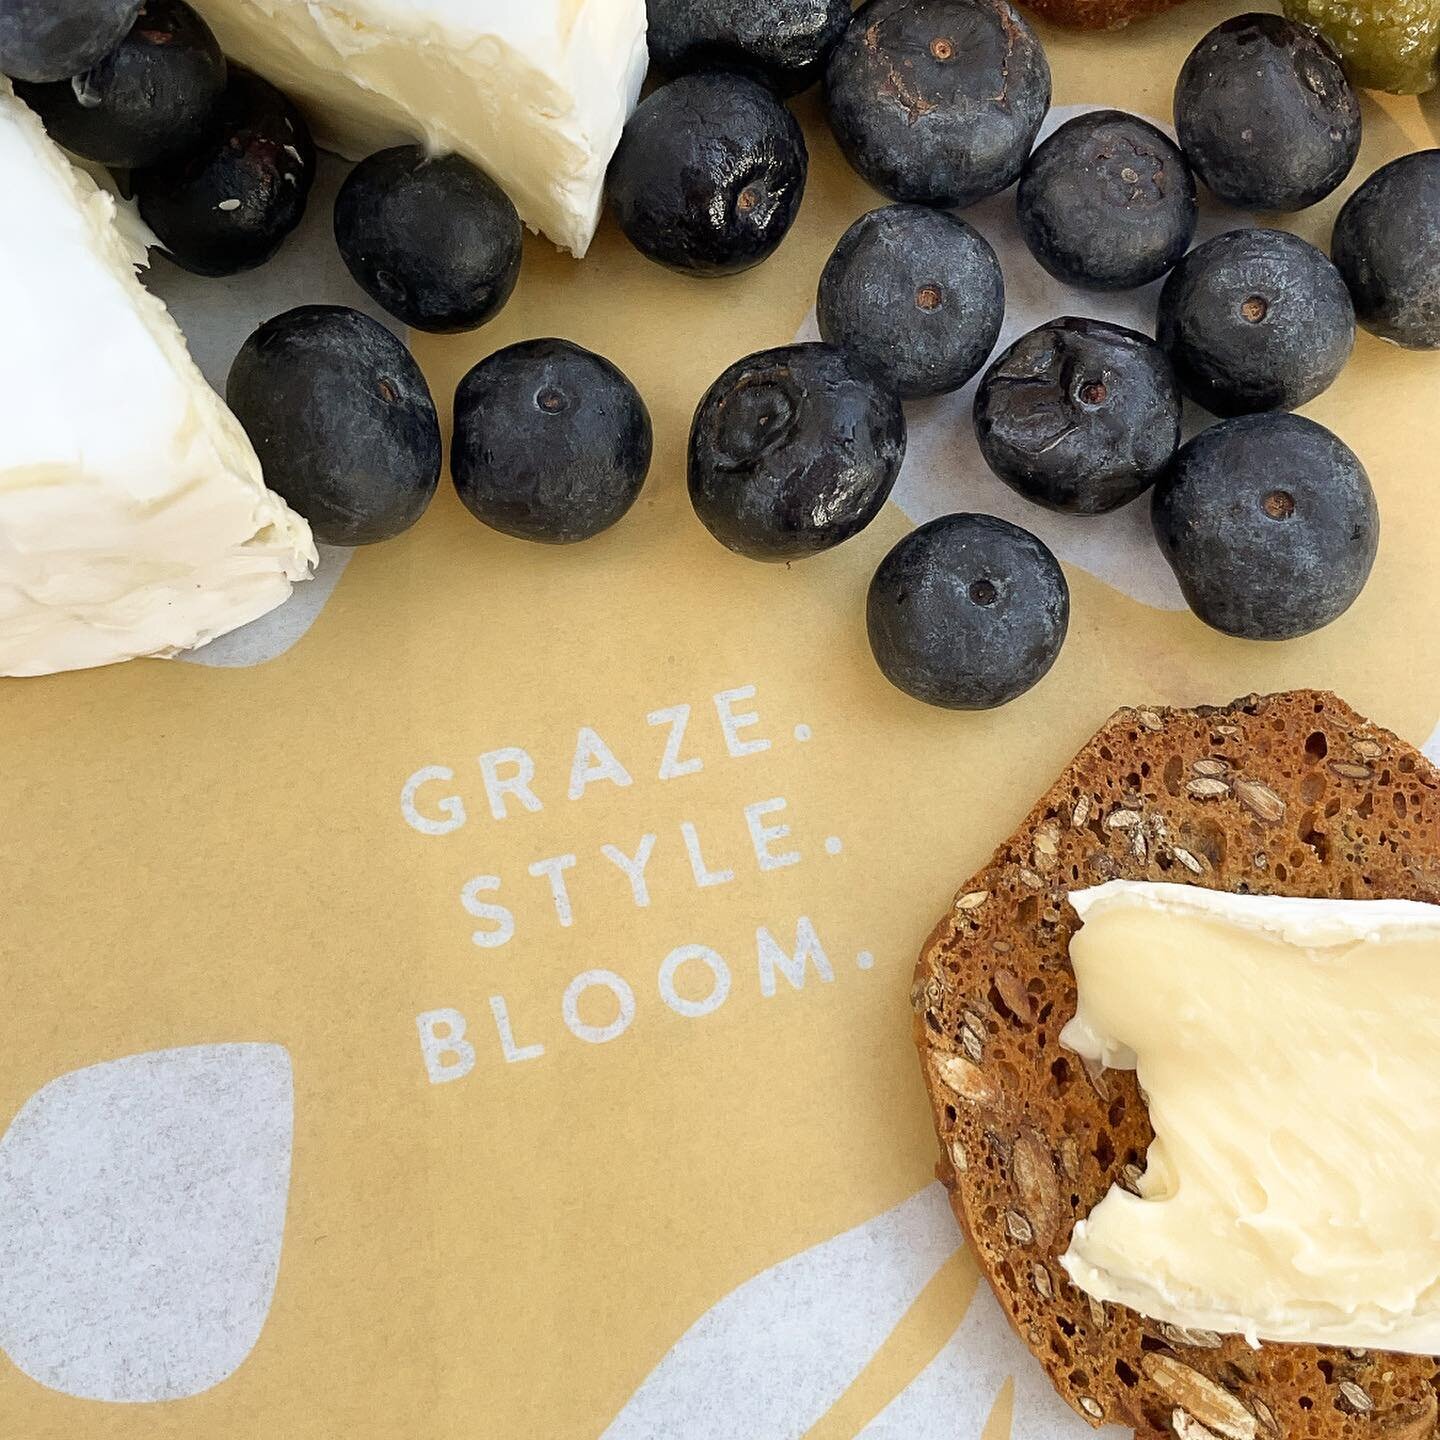 We&rsquo;ve been working on a lot of exciting projects the past few months. The design process is really fun, but really love seeing the end product, when everything comes together! 

This is a branding project we did for @grazestylebloom, who offer 